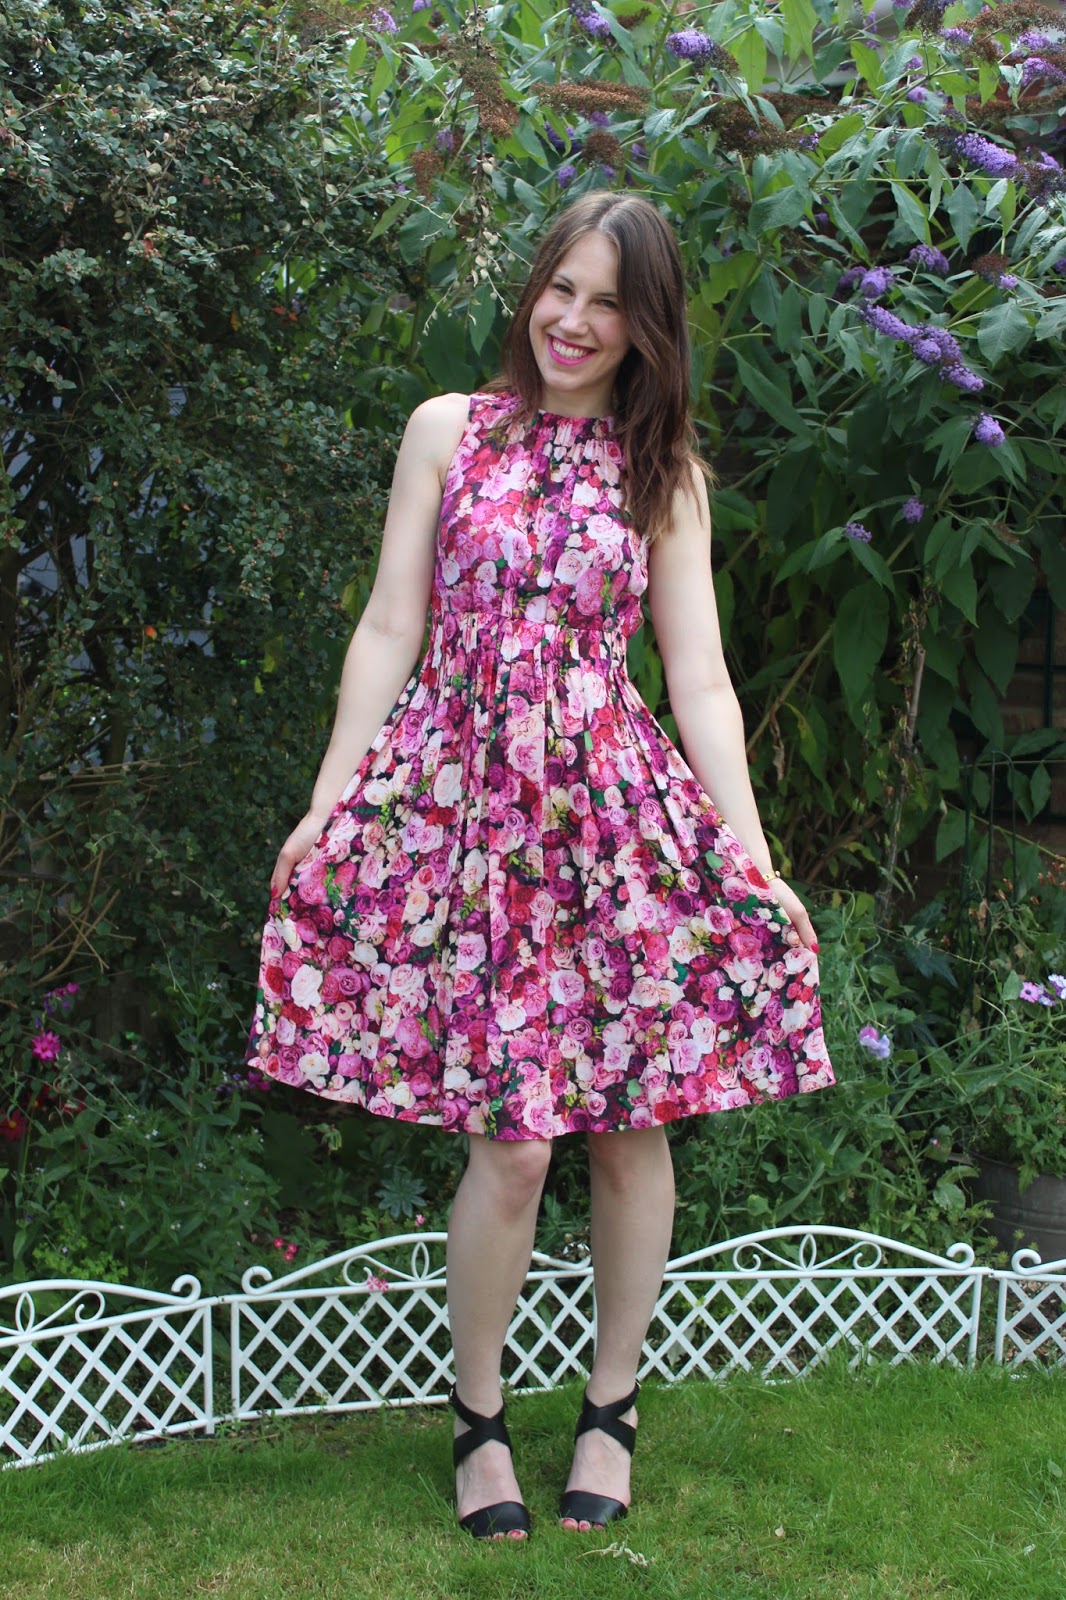 Five Minute Style: Rose Garden